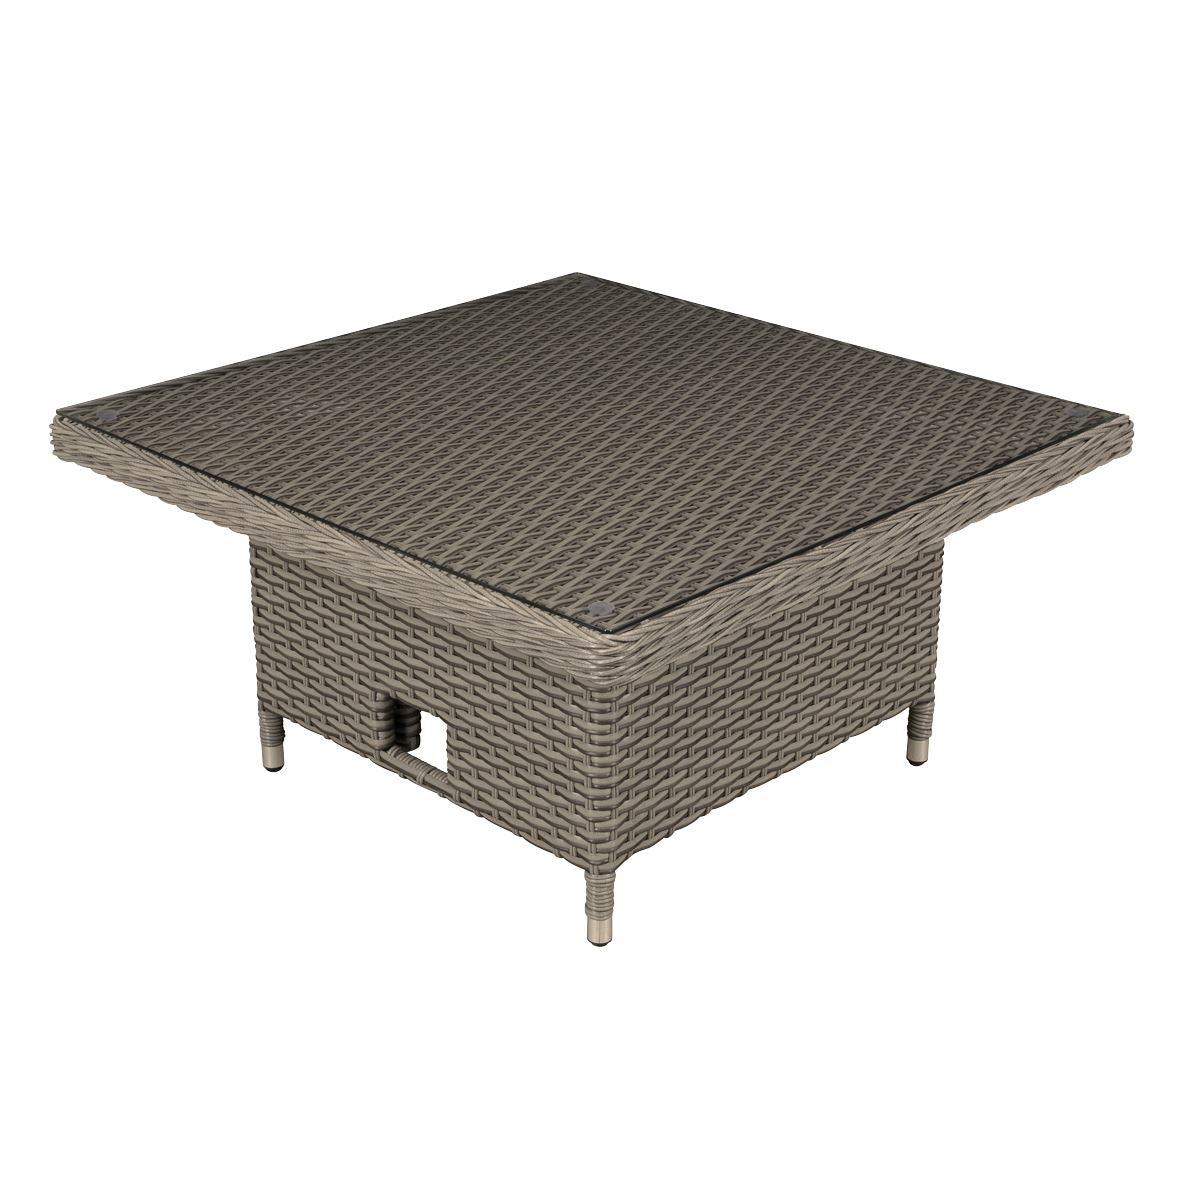 Dellonda Chester Rattan Wicker Adjustable Outdoor Dining Table, Brown